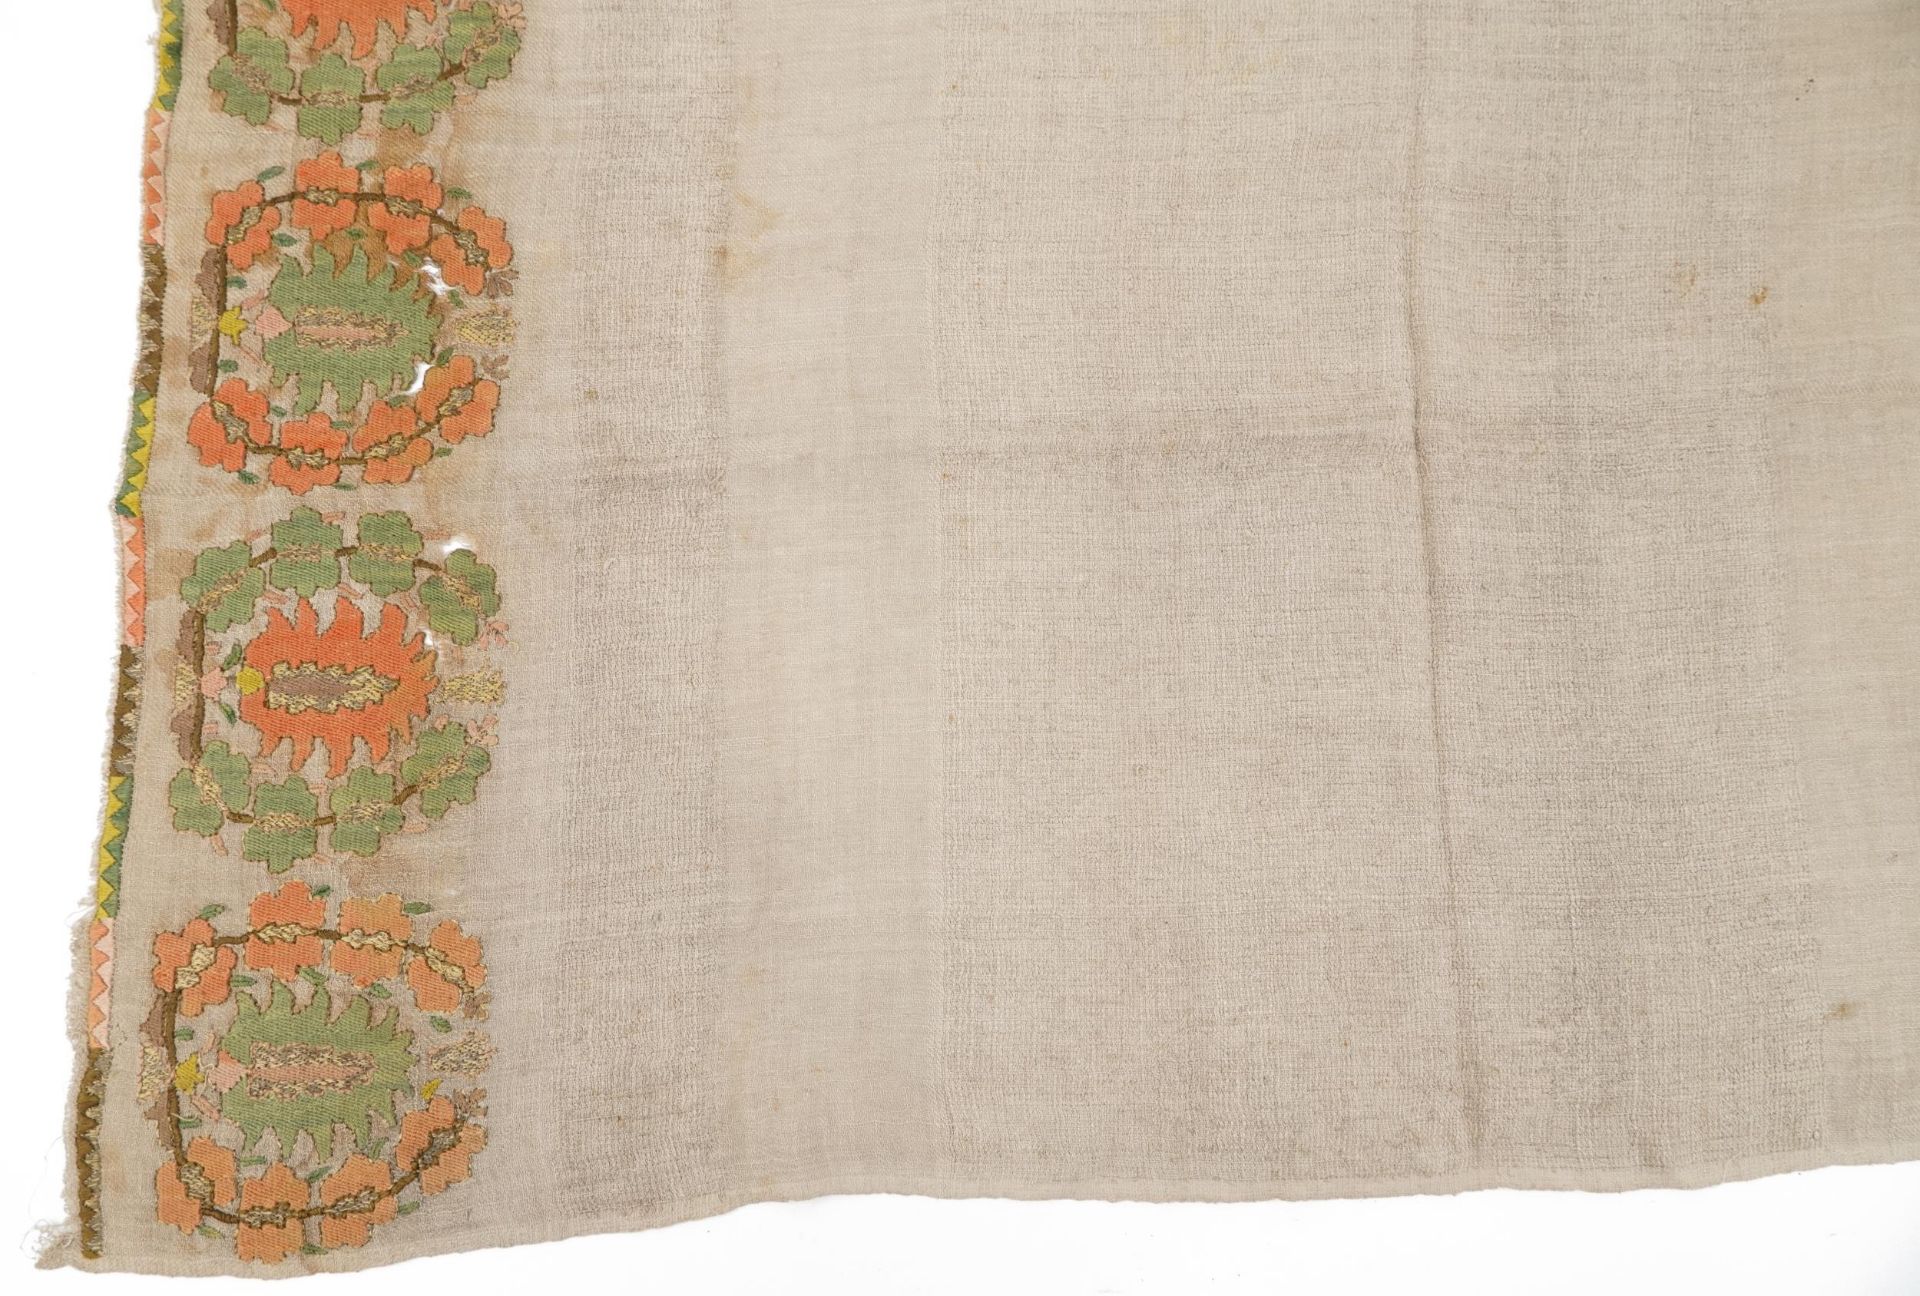 Turkish Ottoman Yaghk cotton and silk textile embroidered with flowers, 130cm x 66cm - Image 8 of 12